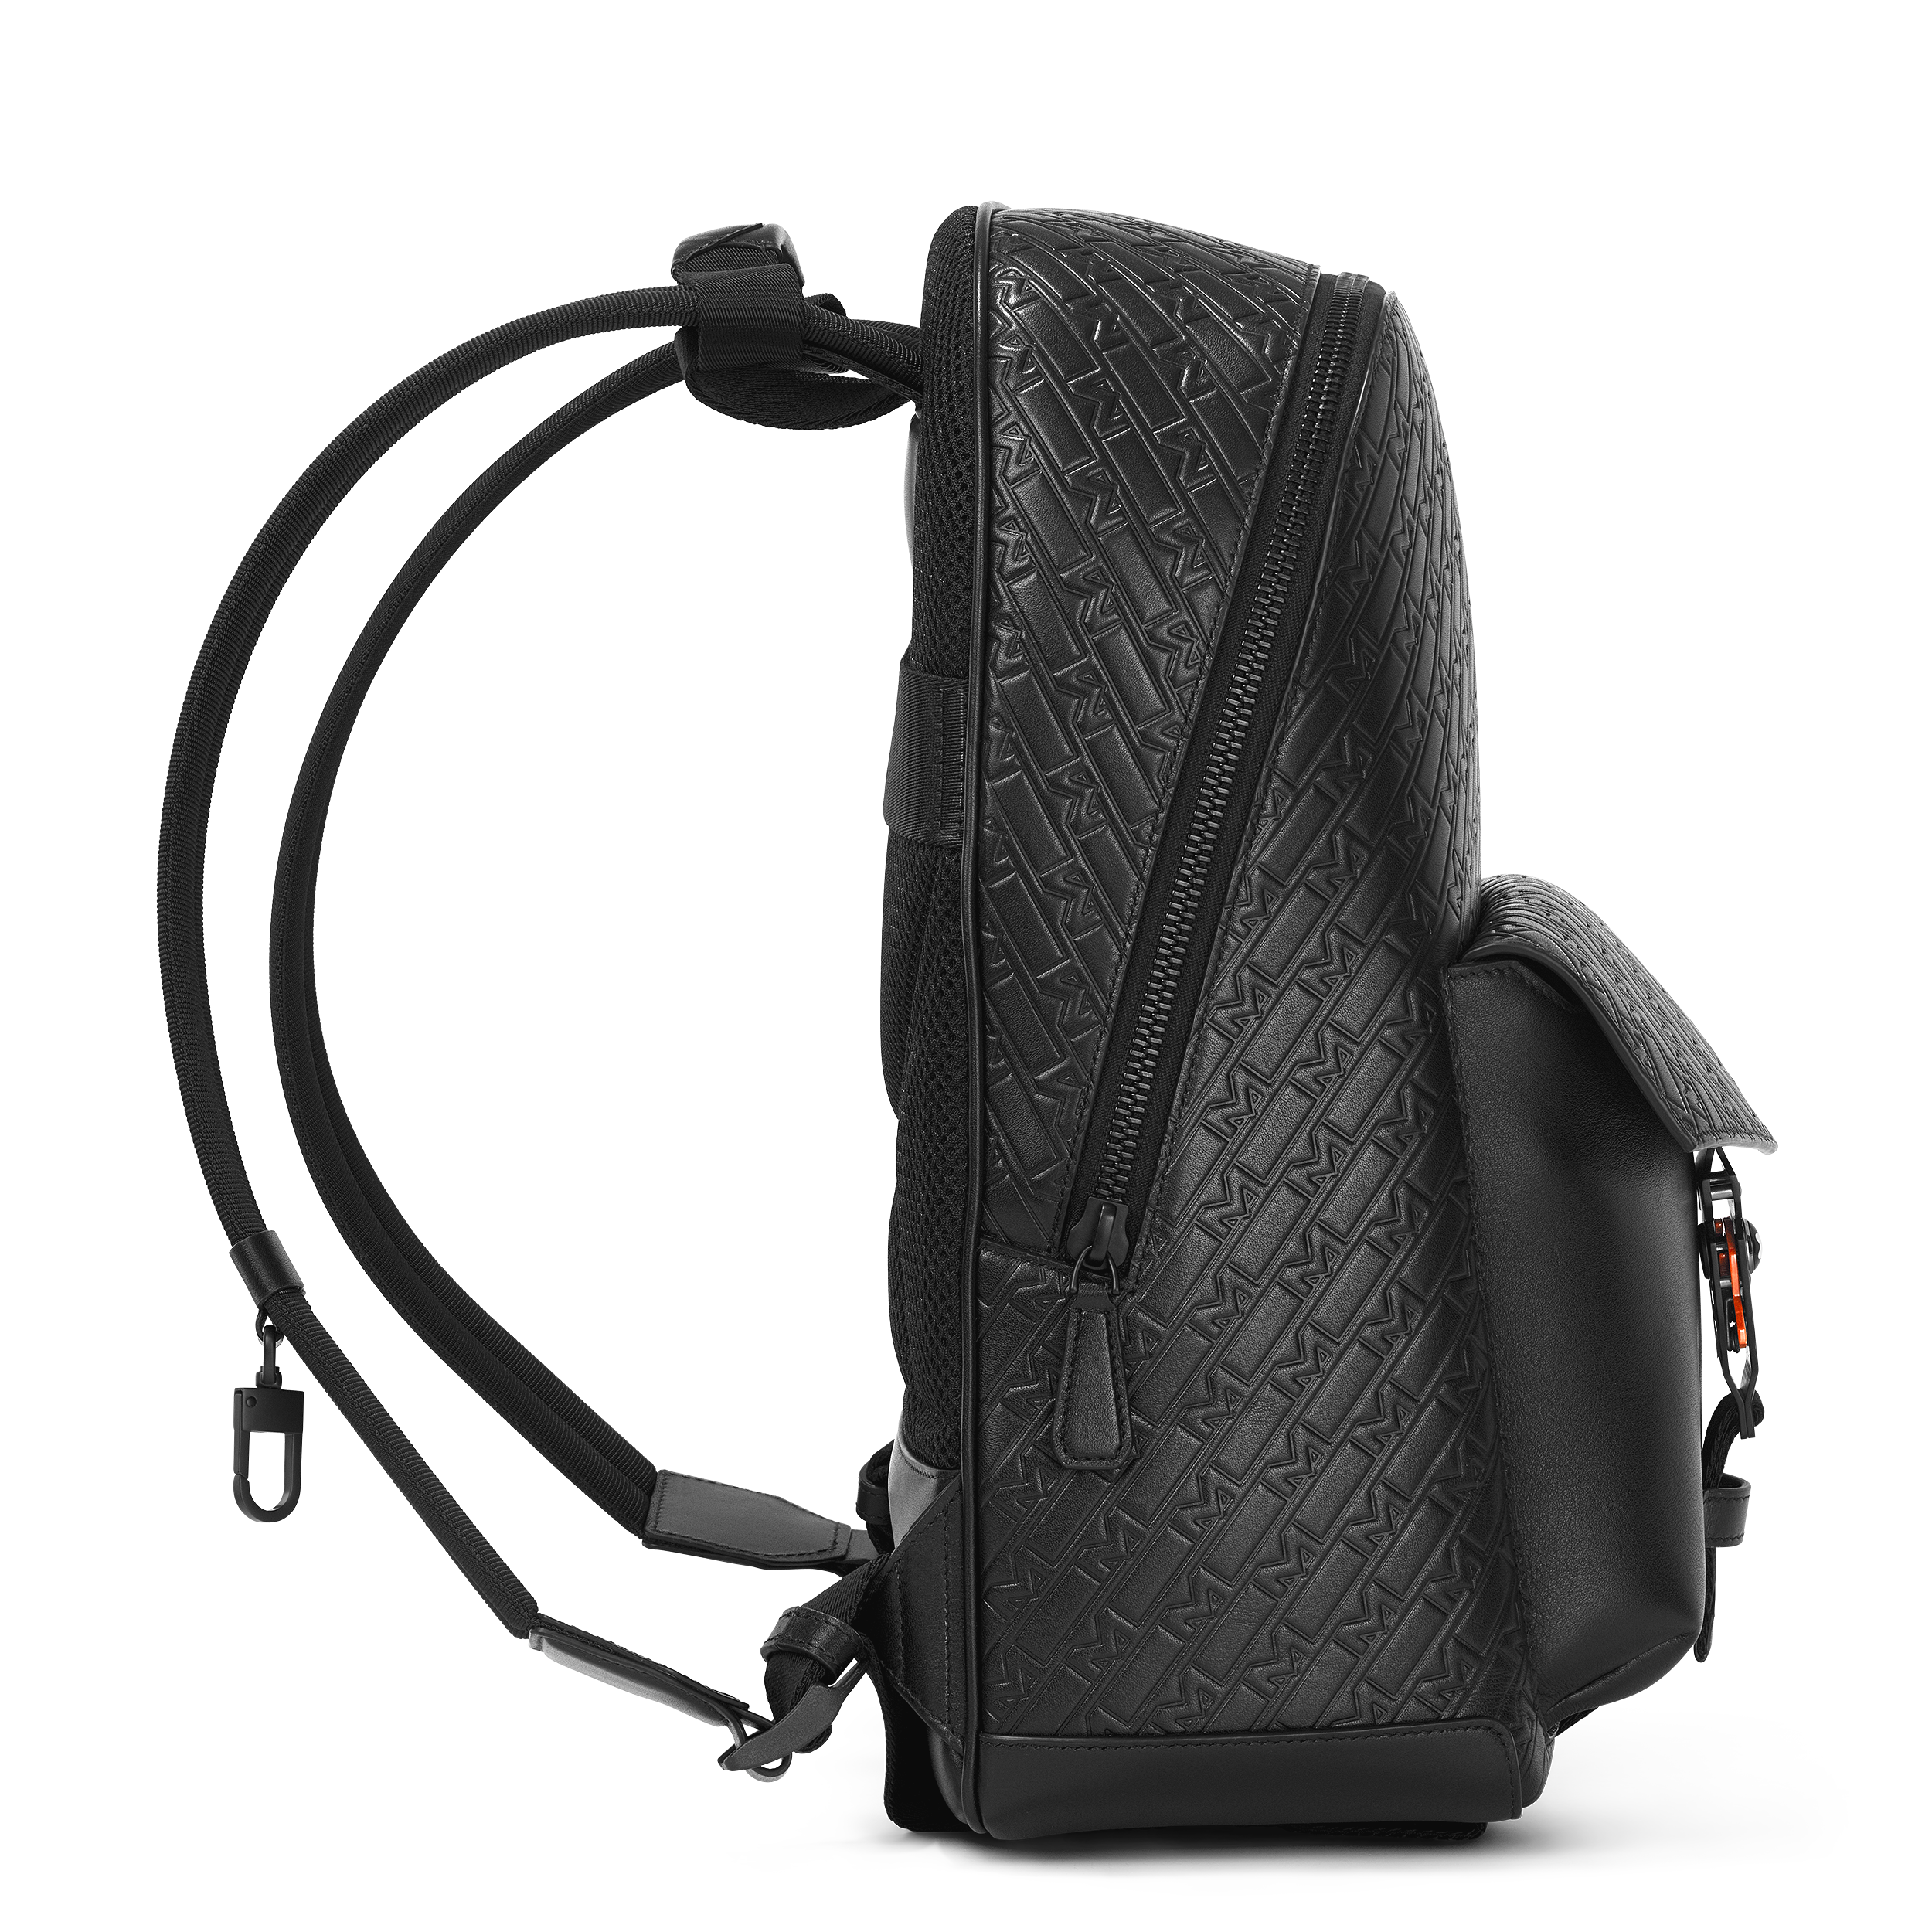 Montblanc M_Gram 4810 backpack with M LOCK 4810 buckle, image 4